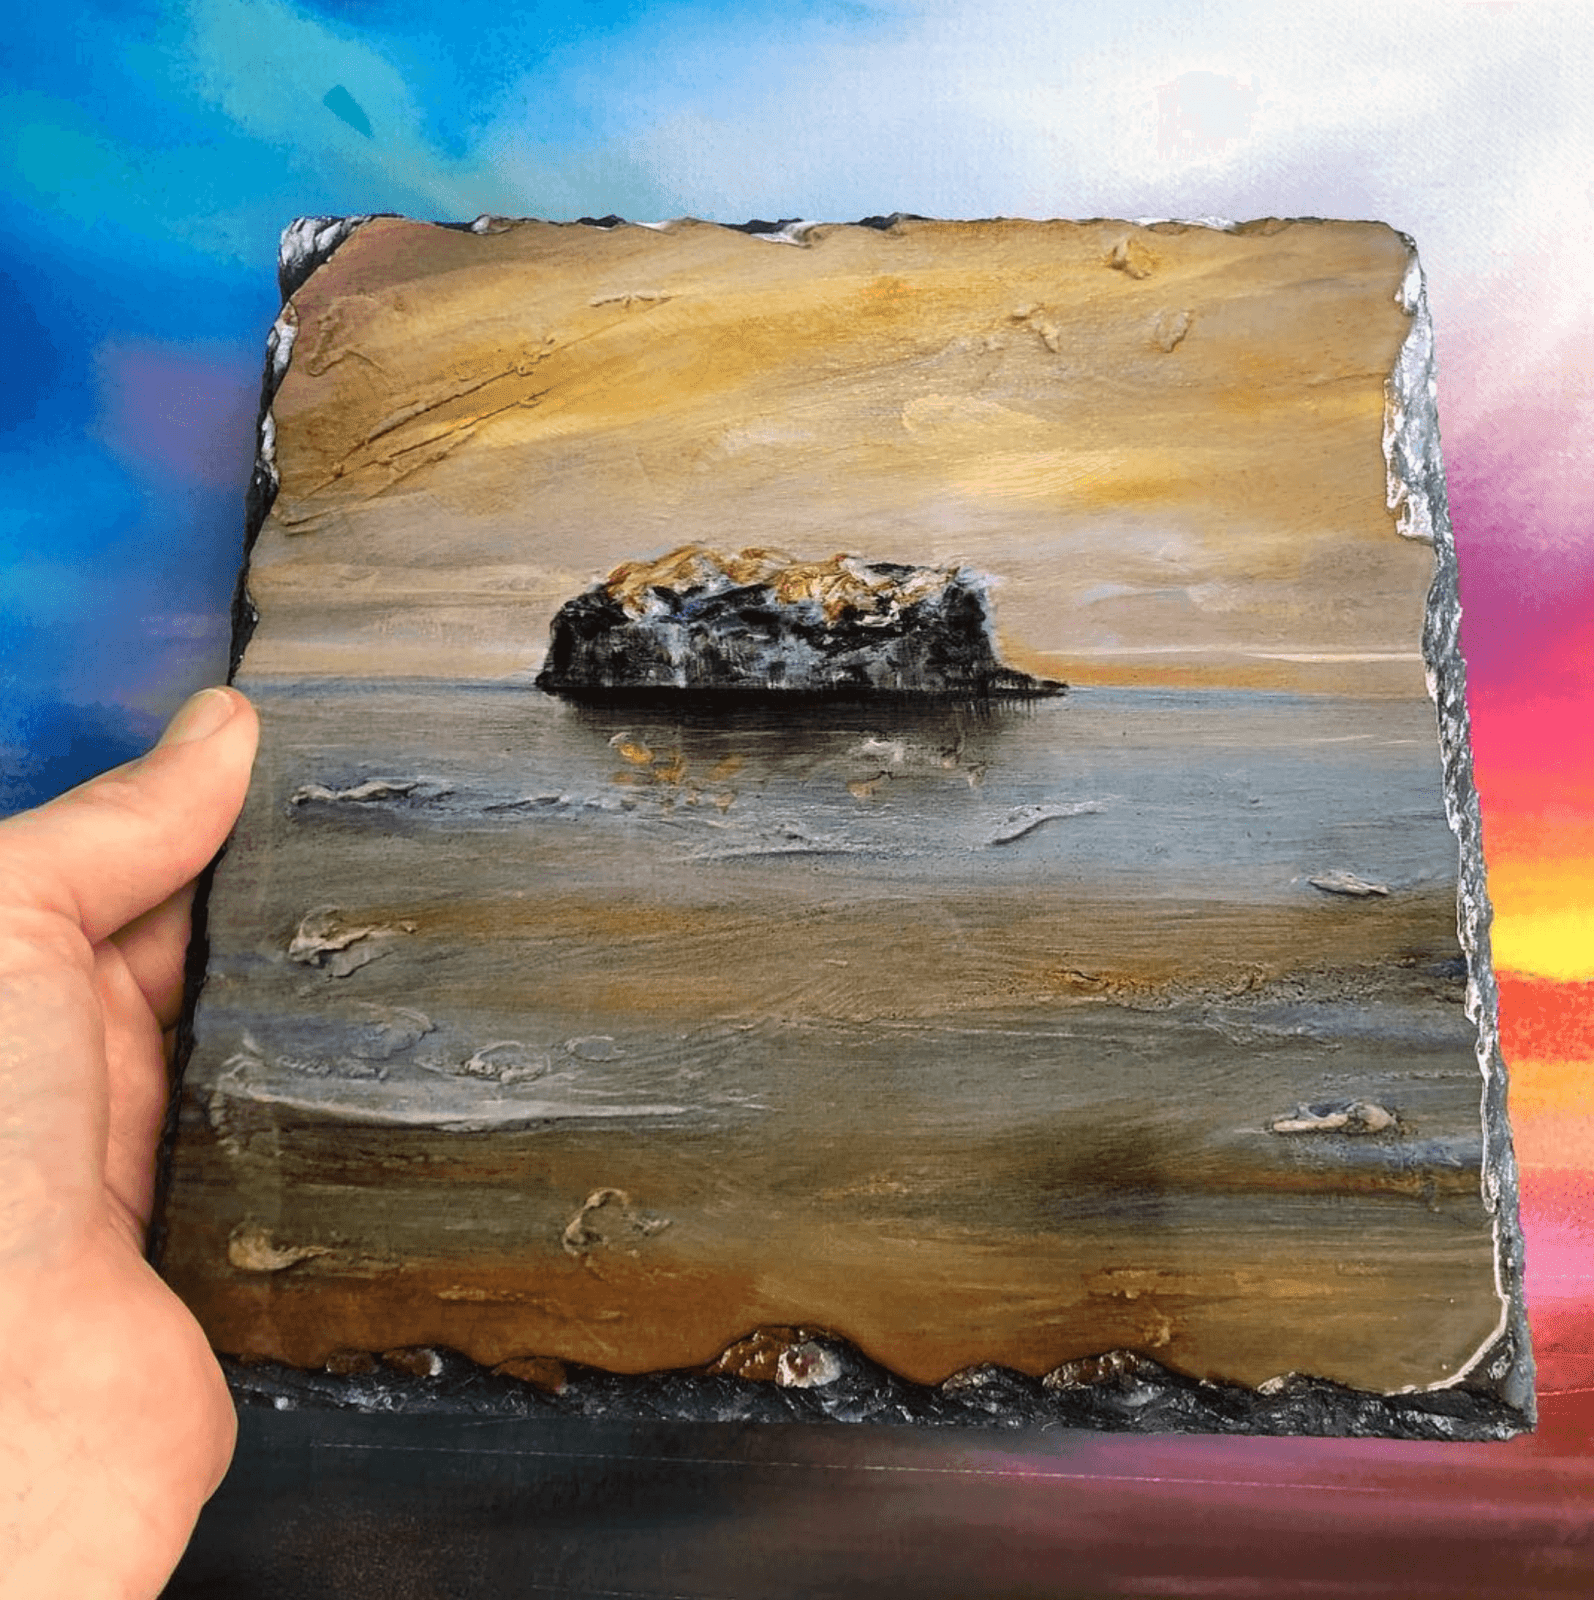 River Clyde Twilight Scottish Slate Art-Slate Art-River Clyde Art Gallery-Paintings, Prints, Homeware, Art Gifts From Scotland By Scottish Artist Kevin Hunter